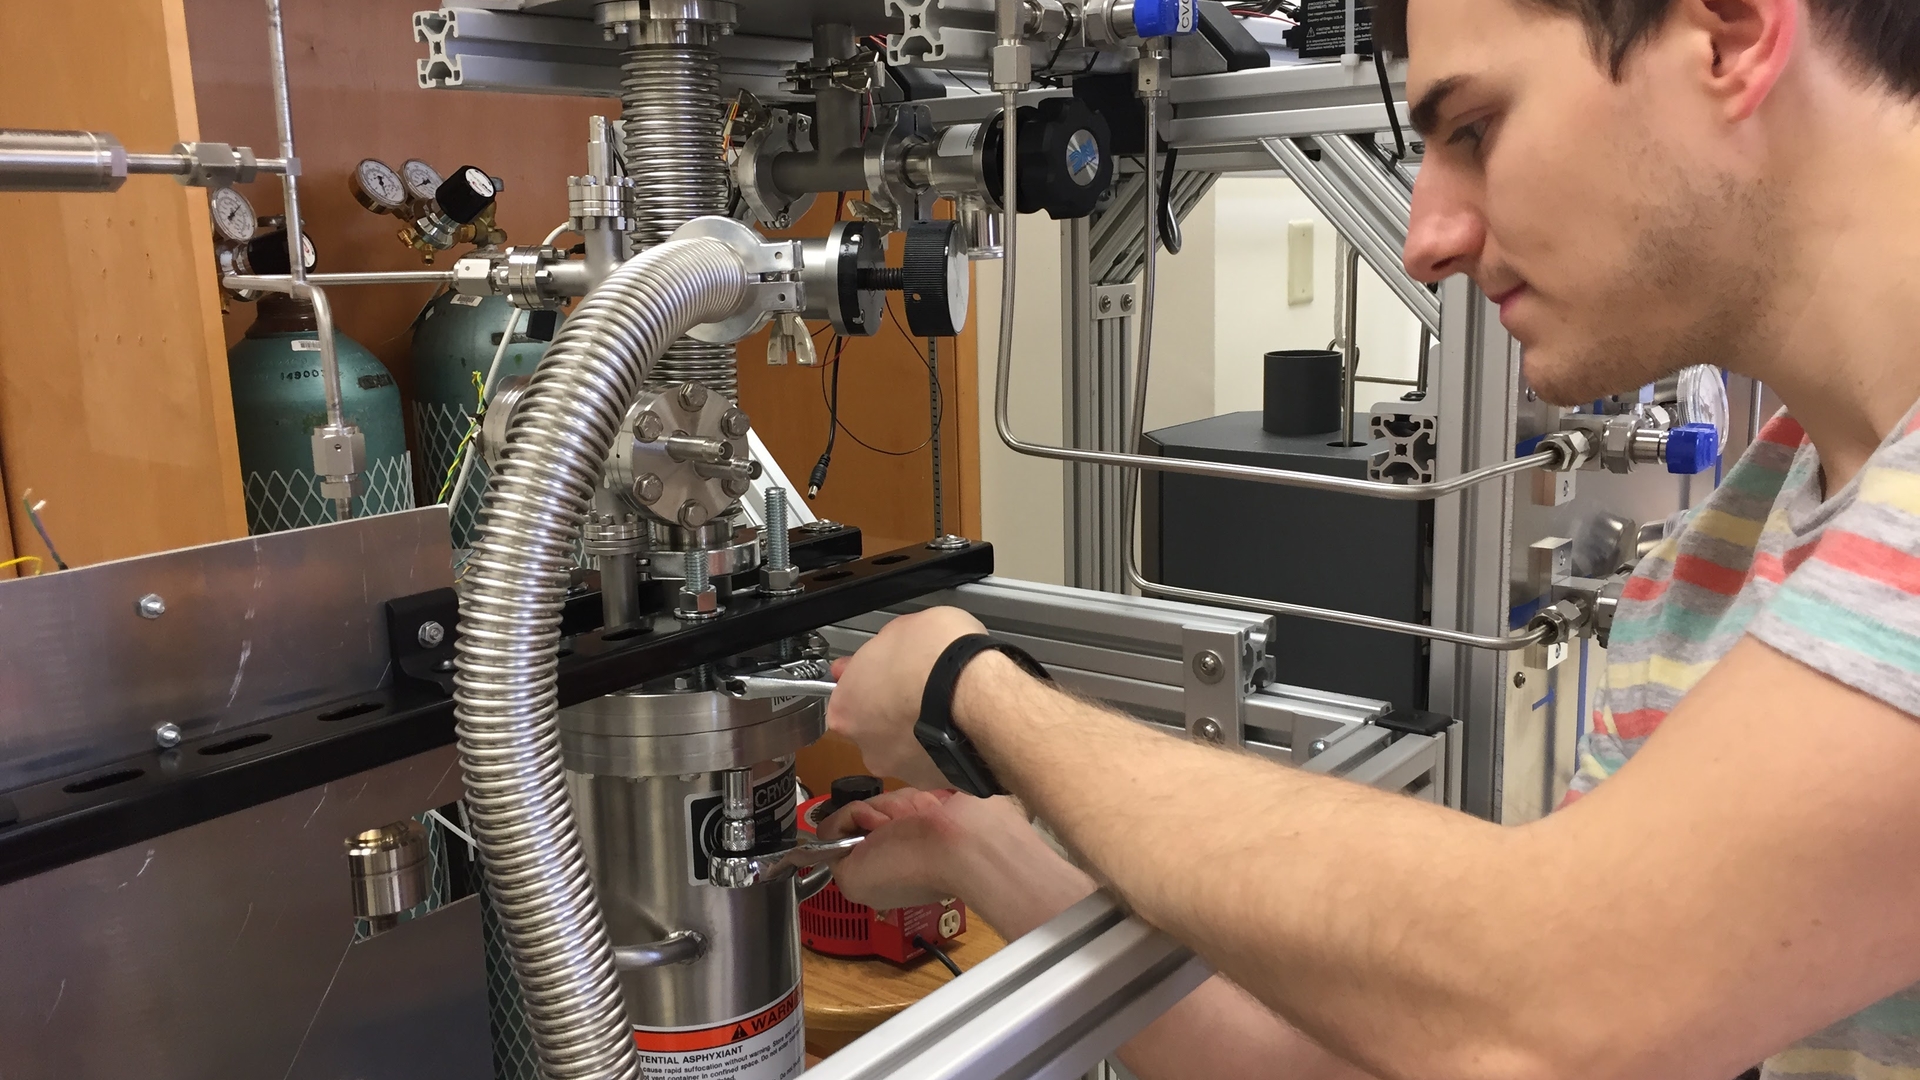 Chris Nedlik who received his PhD in physics at UMass, sealing liquid xenon in the UMass model of the LZ detector that he and Scott Hertel built in Hertel’s lab. Image credit: UMass Amherst